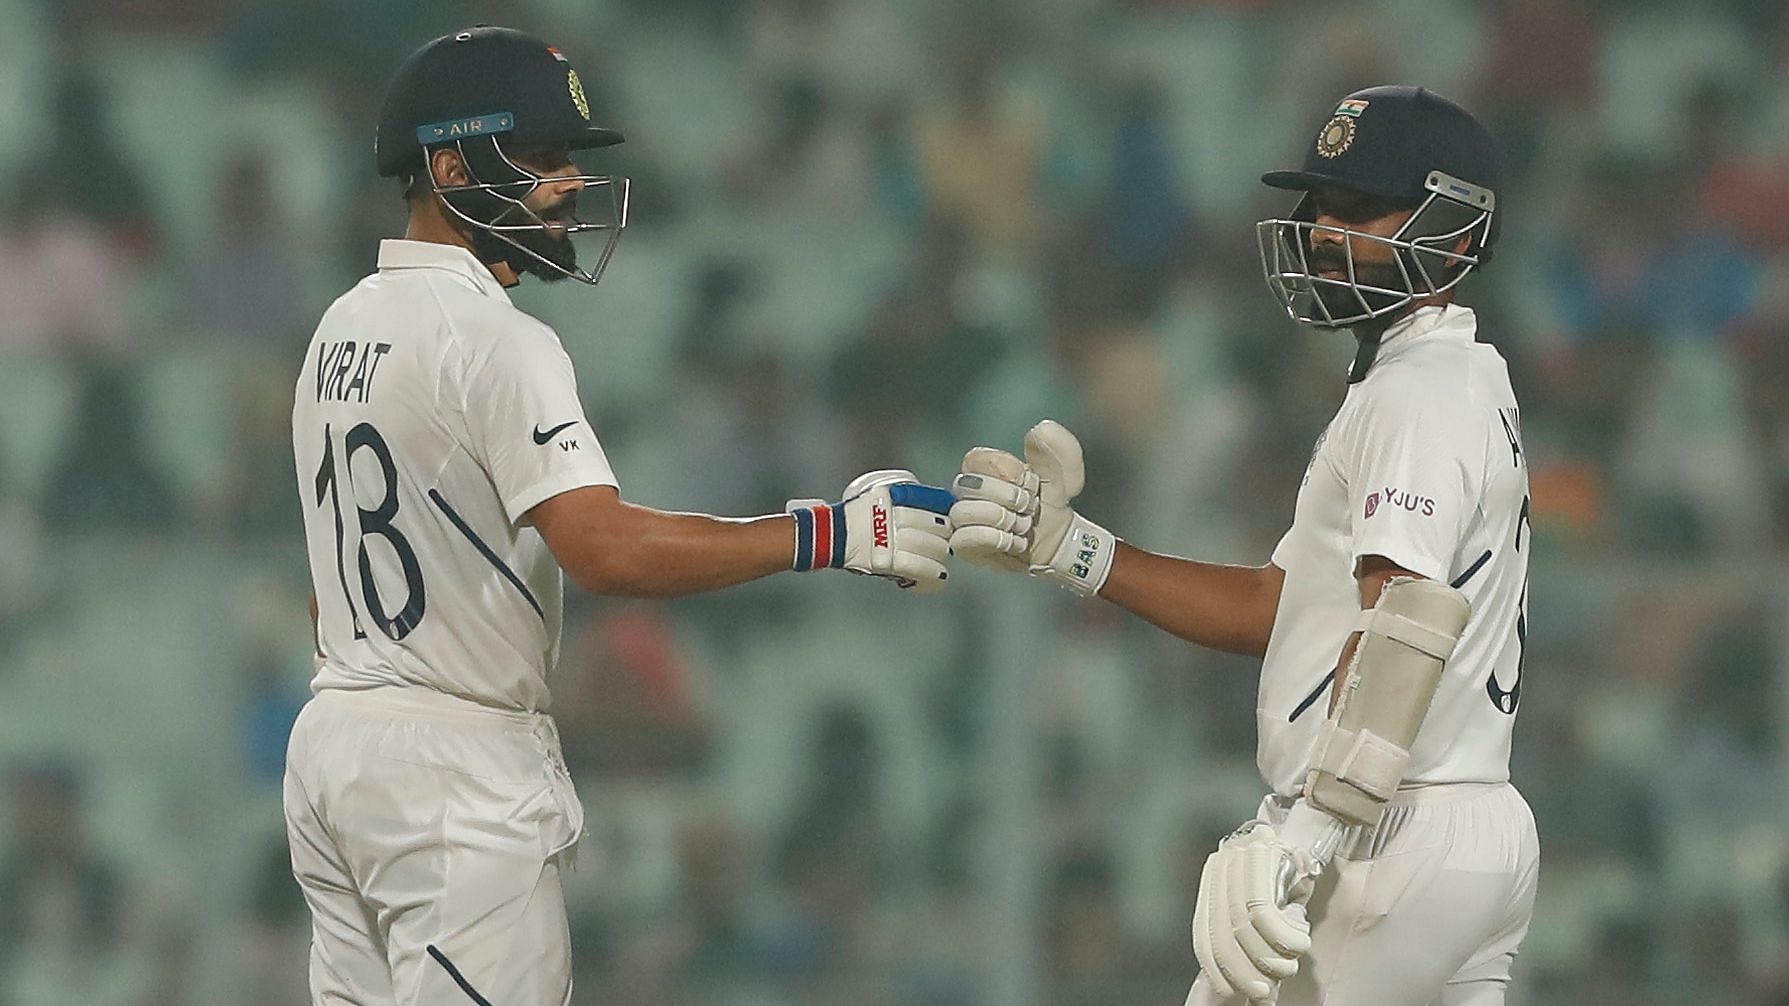 Day-Night Test, India vs Bangladesh: Live updates from Day 1 of the pink ball Test at Eden Gardens in Kolkata.